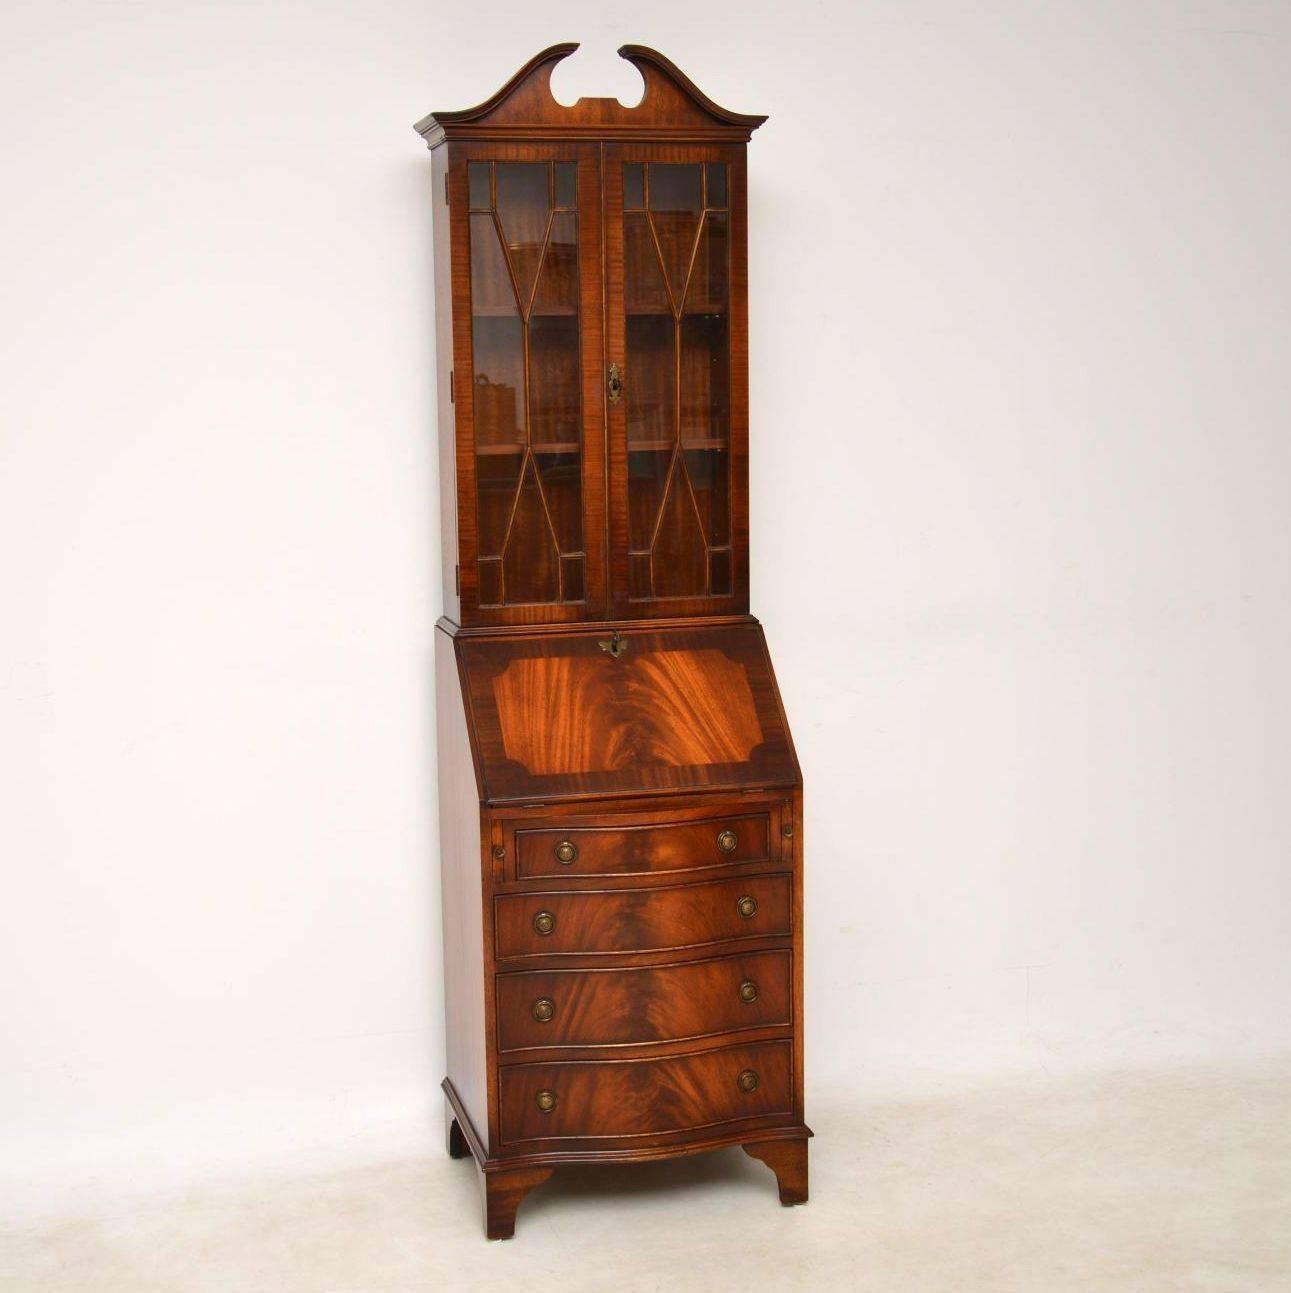 This flame mahogany bureau bookcase has lovely slim proportions and some great features. It's antique Georgian style, dating from around the 1950s period and is in excellent condition. The pediment is well shaped on top of astral-glazed doors with